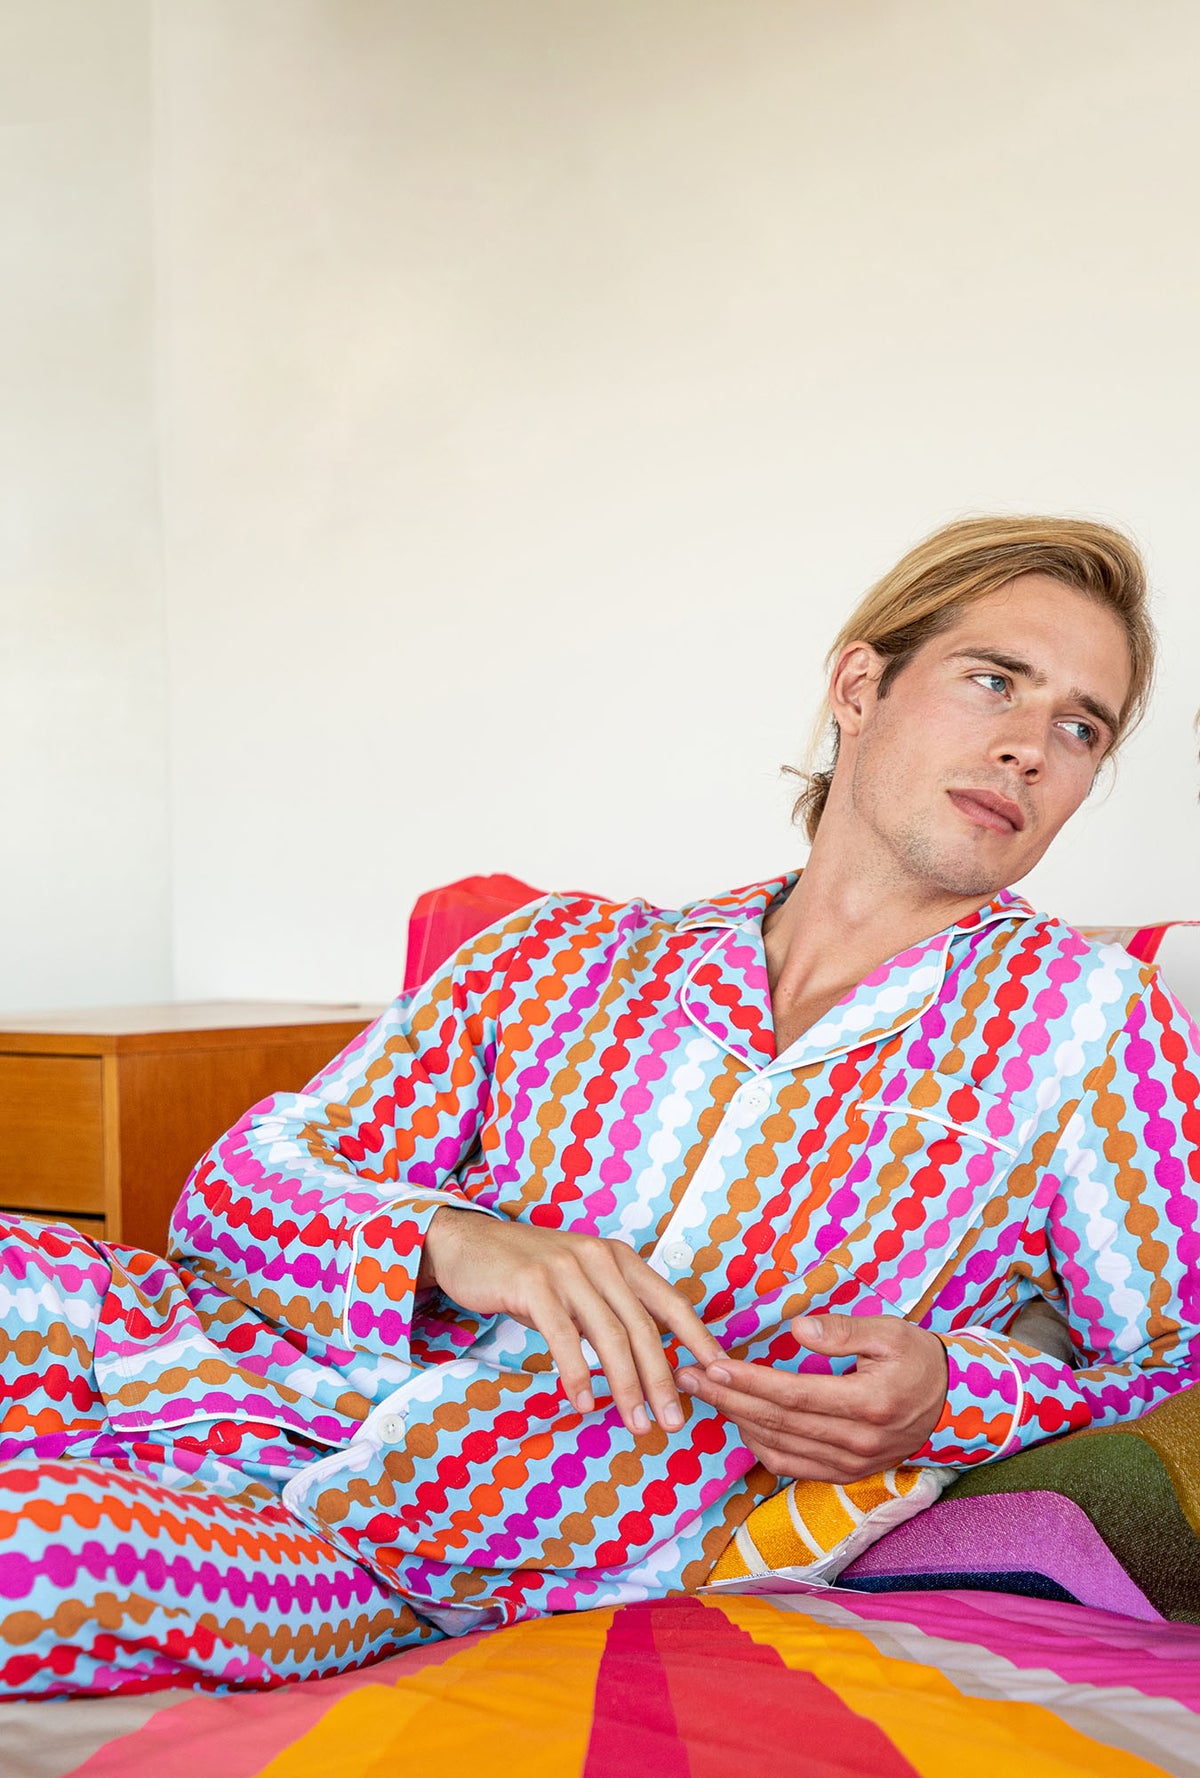 Mr Turk Delivers Colorful Sleepwear with BedHead Pajamas – The